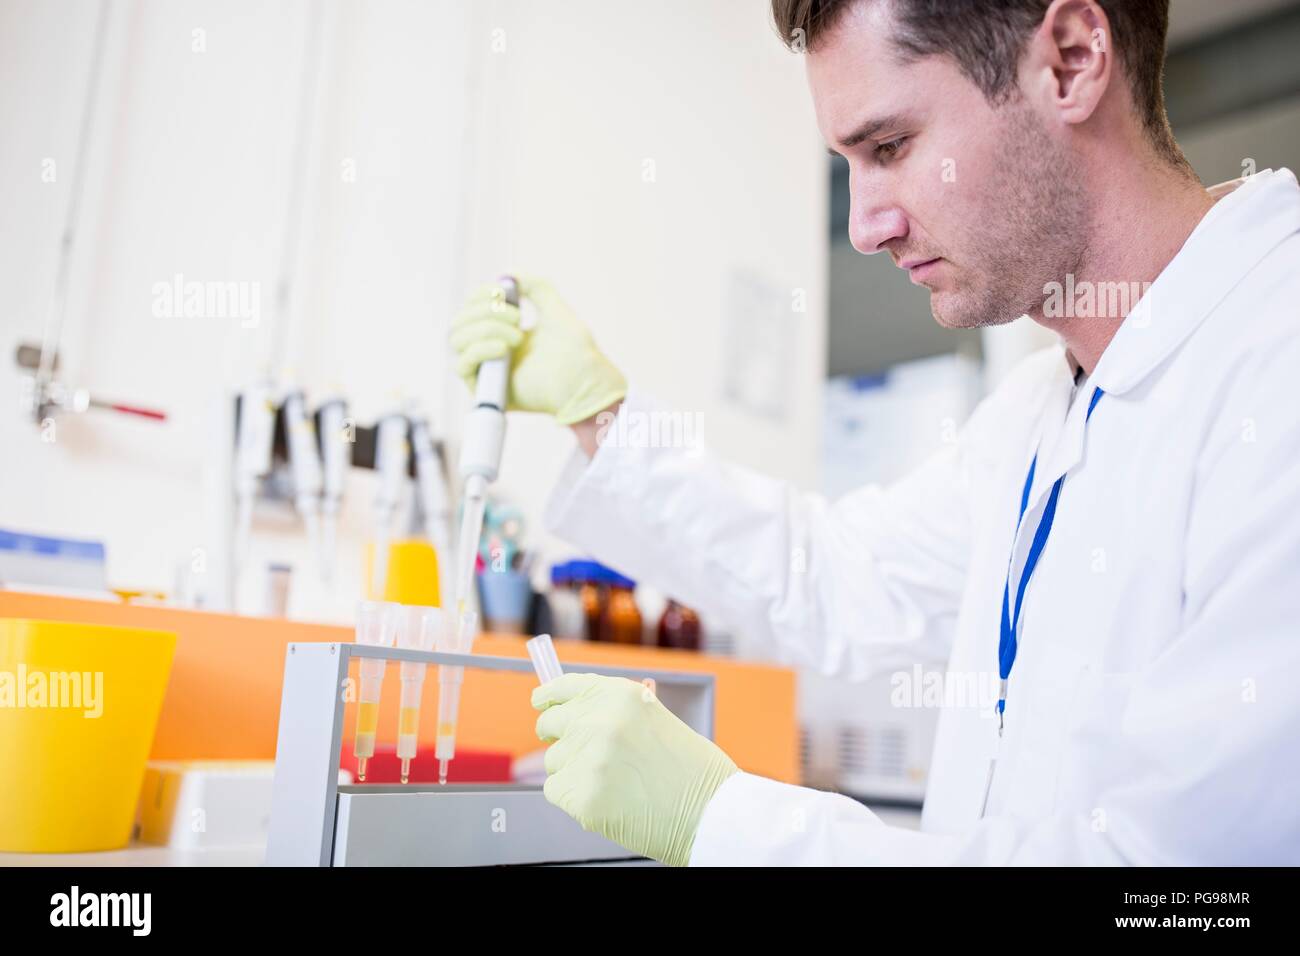 Technician pipetting samples into cartridges for solid phase extraction (SPE). SPE is used to separate biological compounds from a mixture for further analysis. Stock Photo